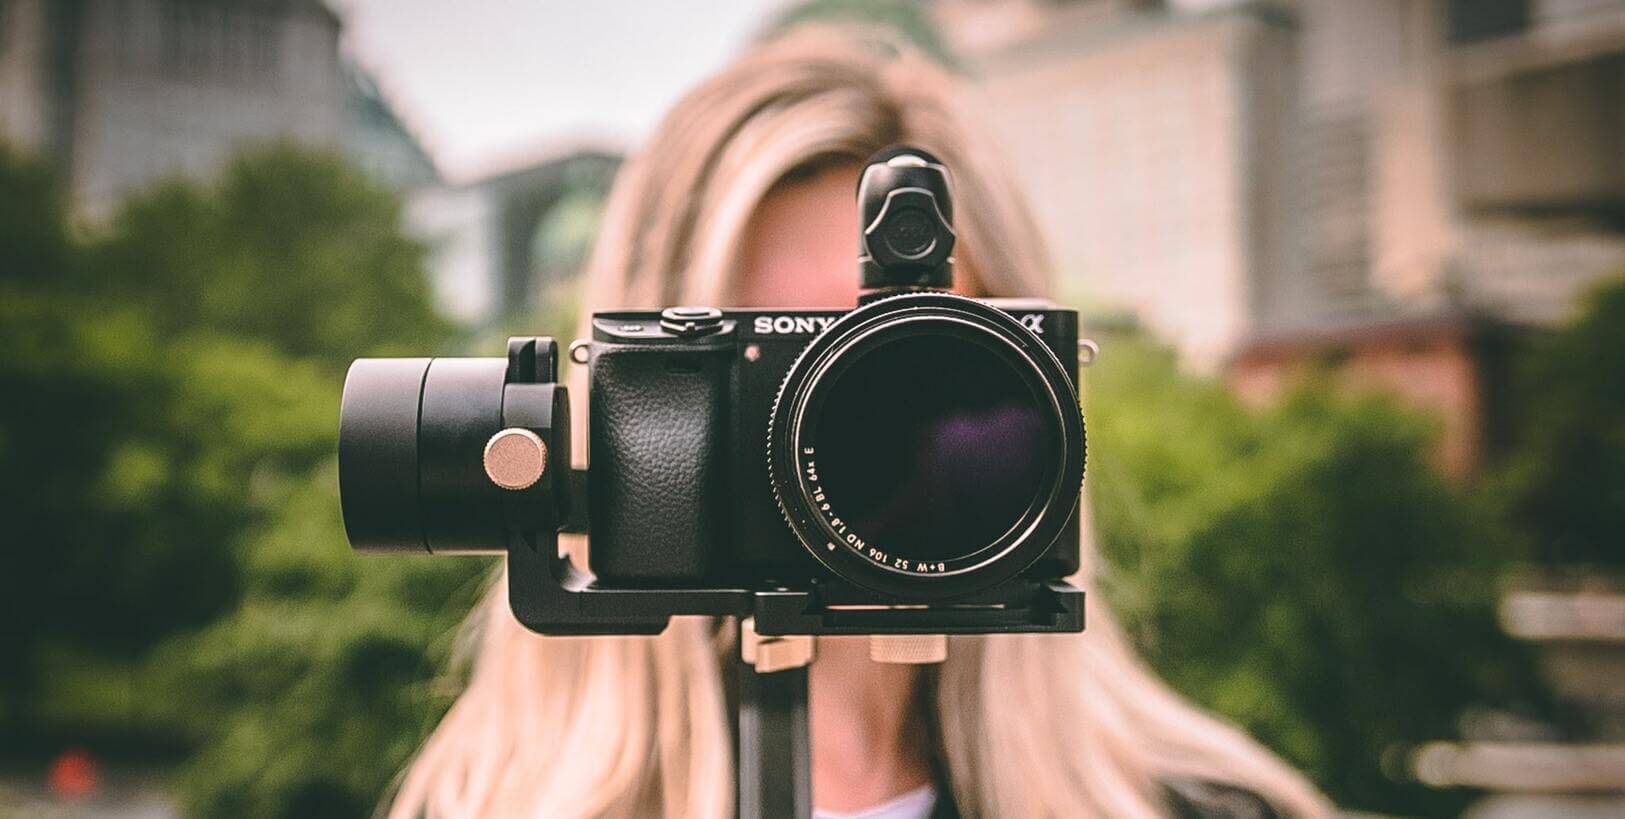 5 Smart Ways Brands Are Using Video In Their Marketing